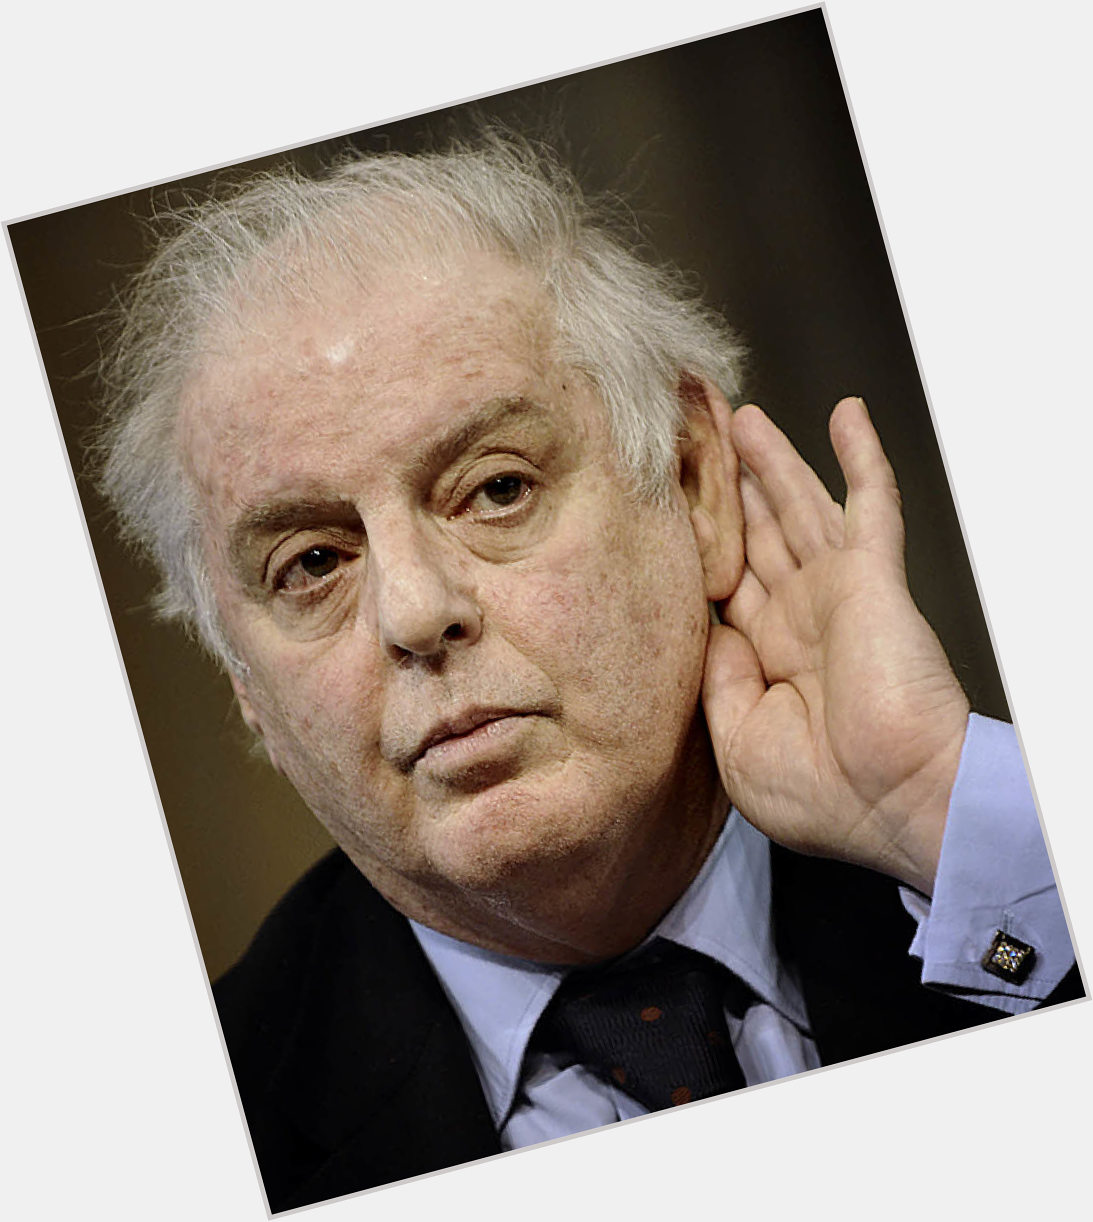 Many happy returns to the unique Daniel Barenboim, 72 years young. Let\s hope he can hear us singing Happy Birthday! 